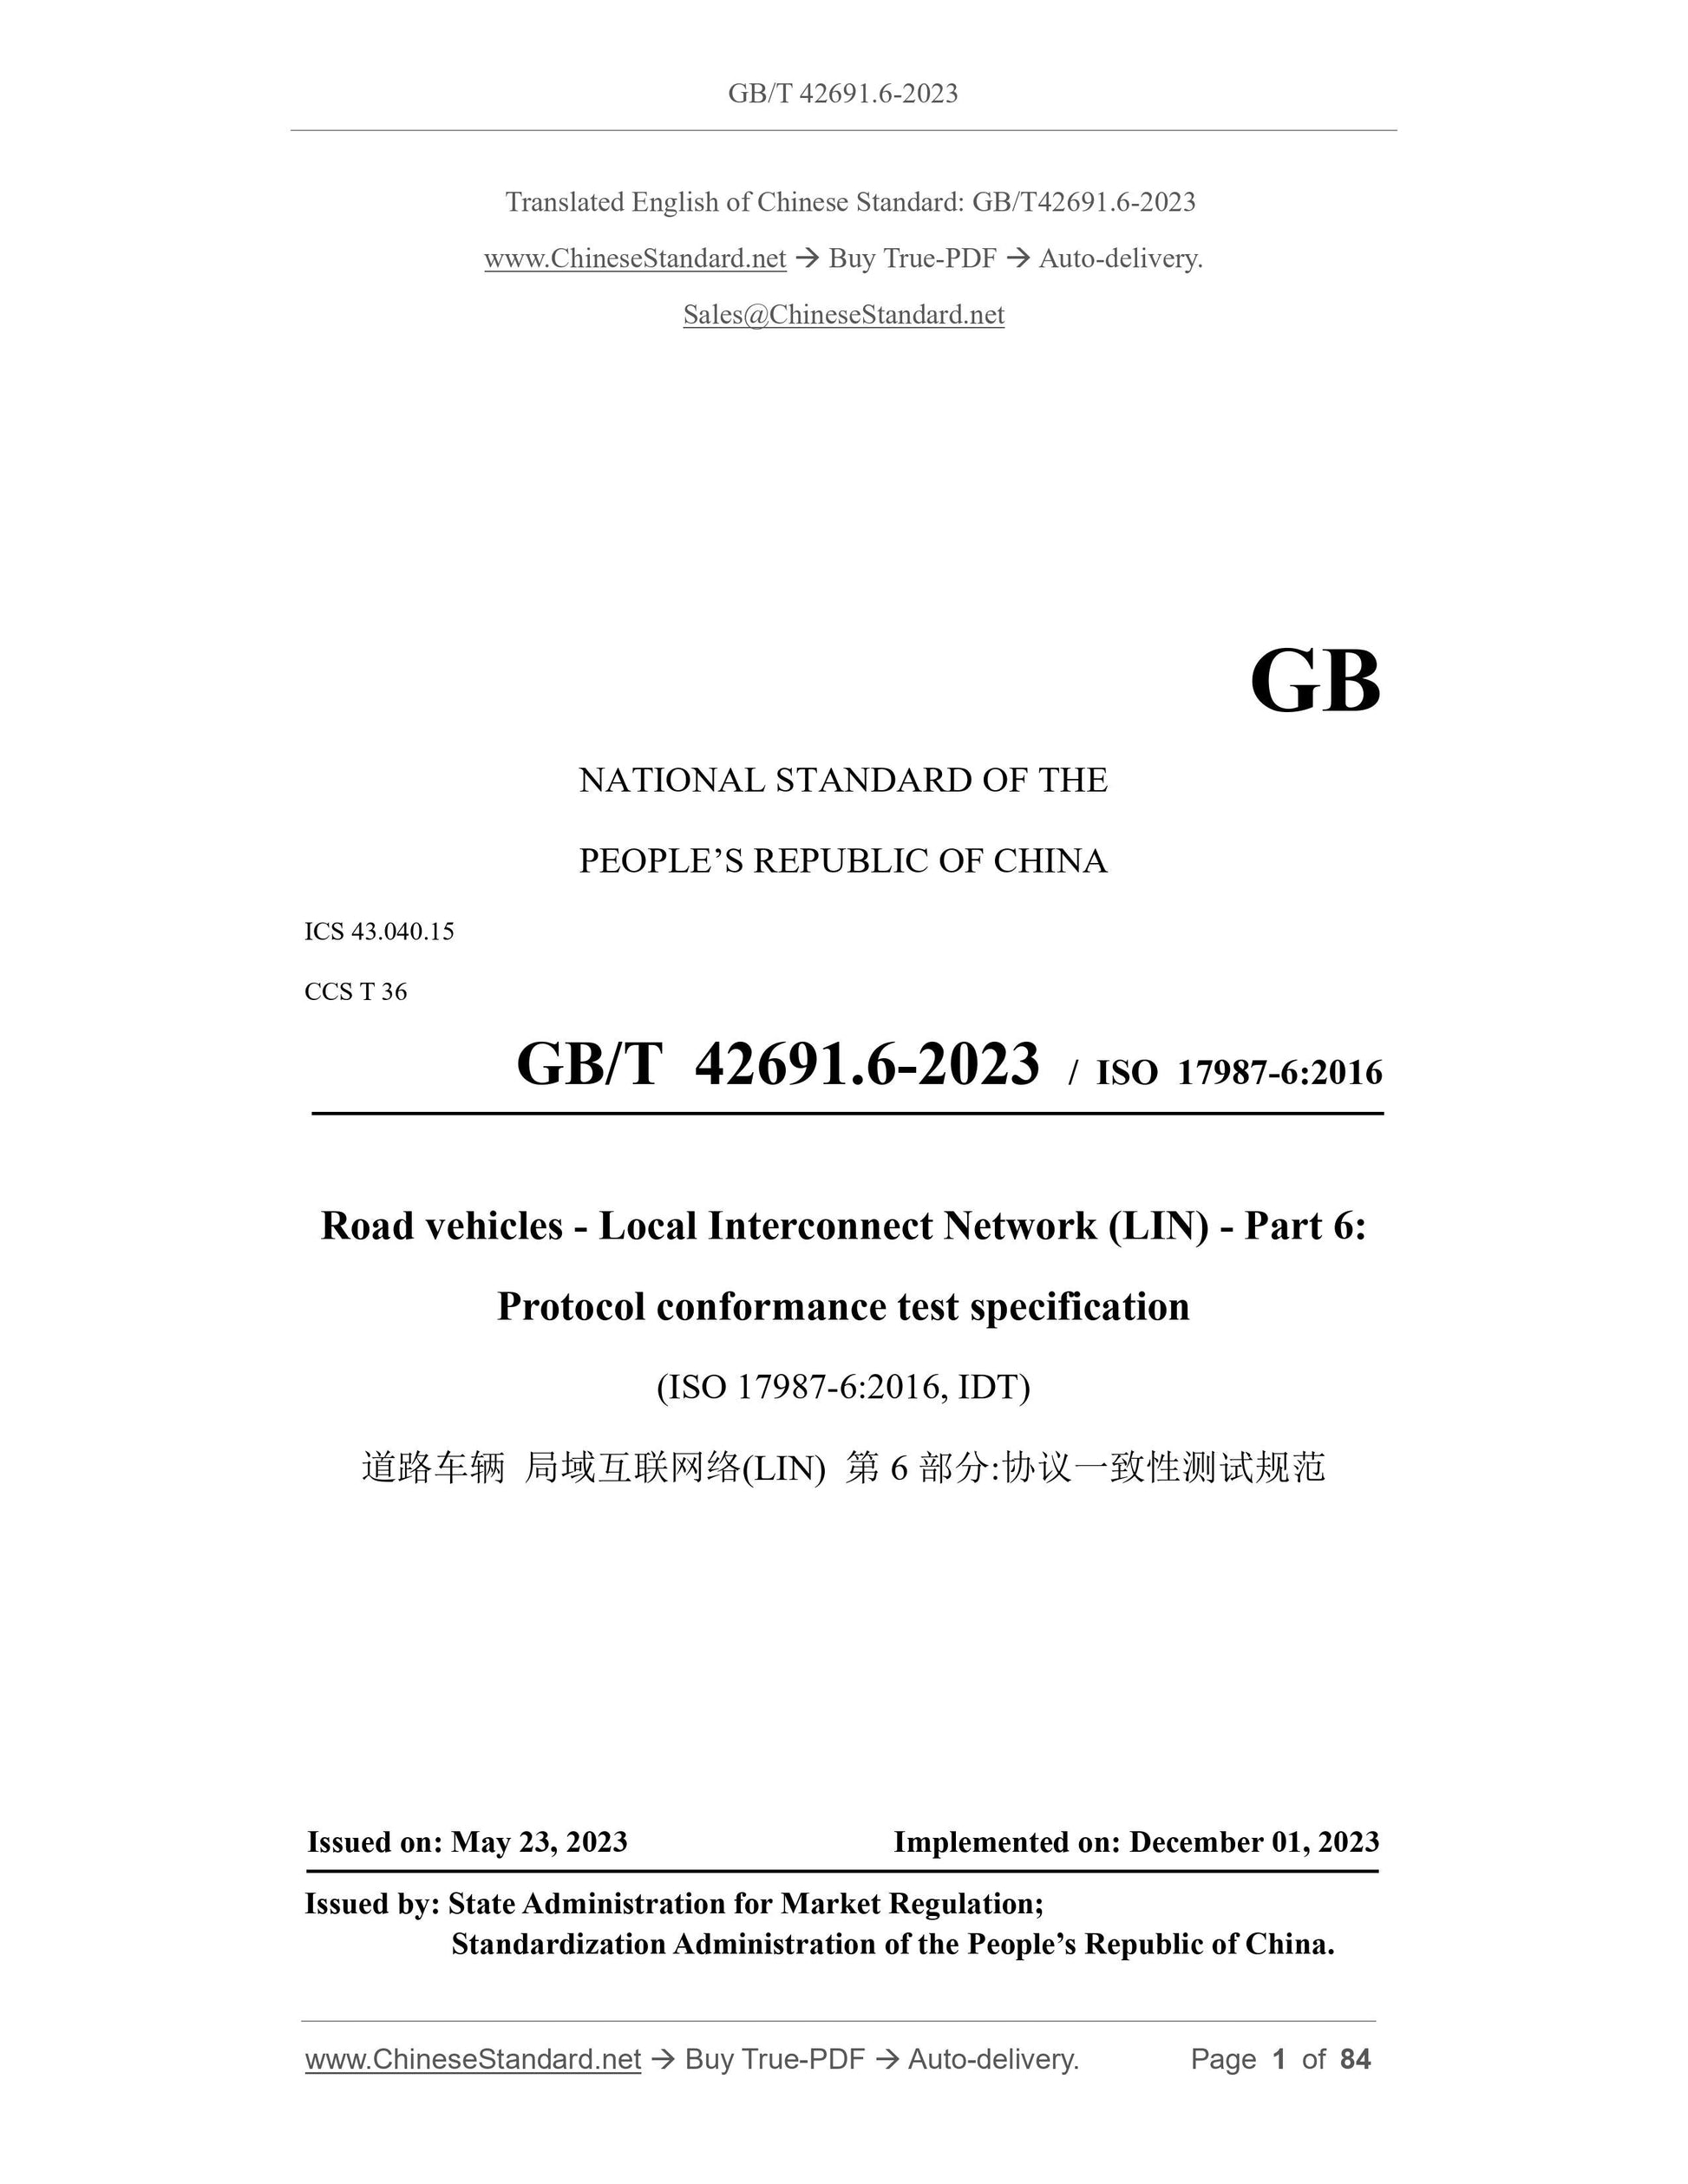 GB/T 42691.6-2023 Page 1